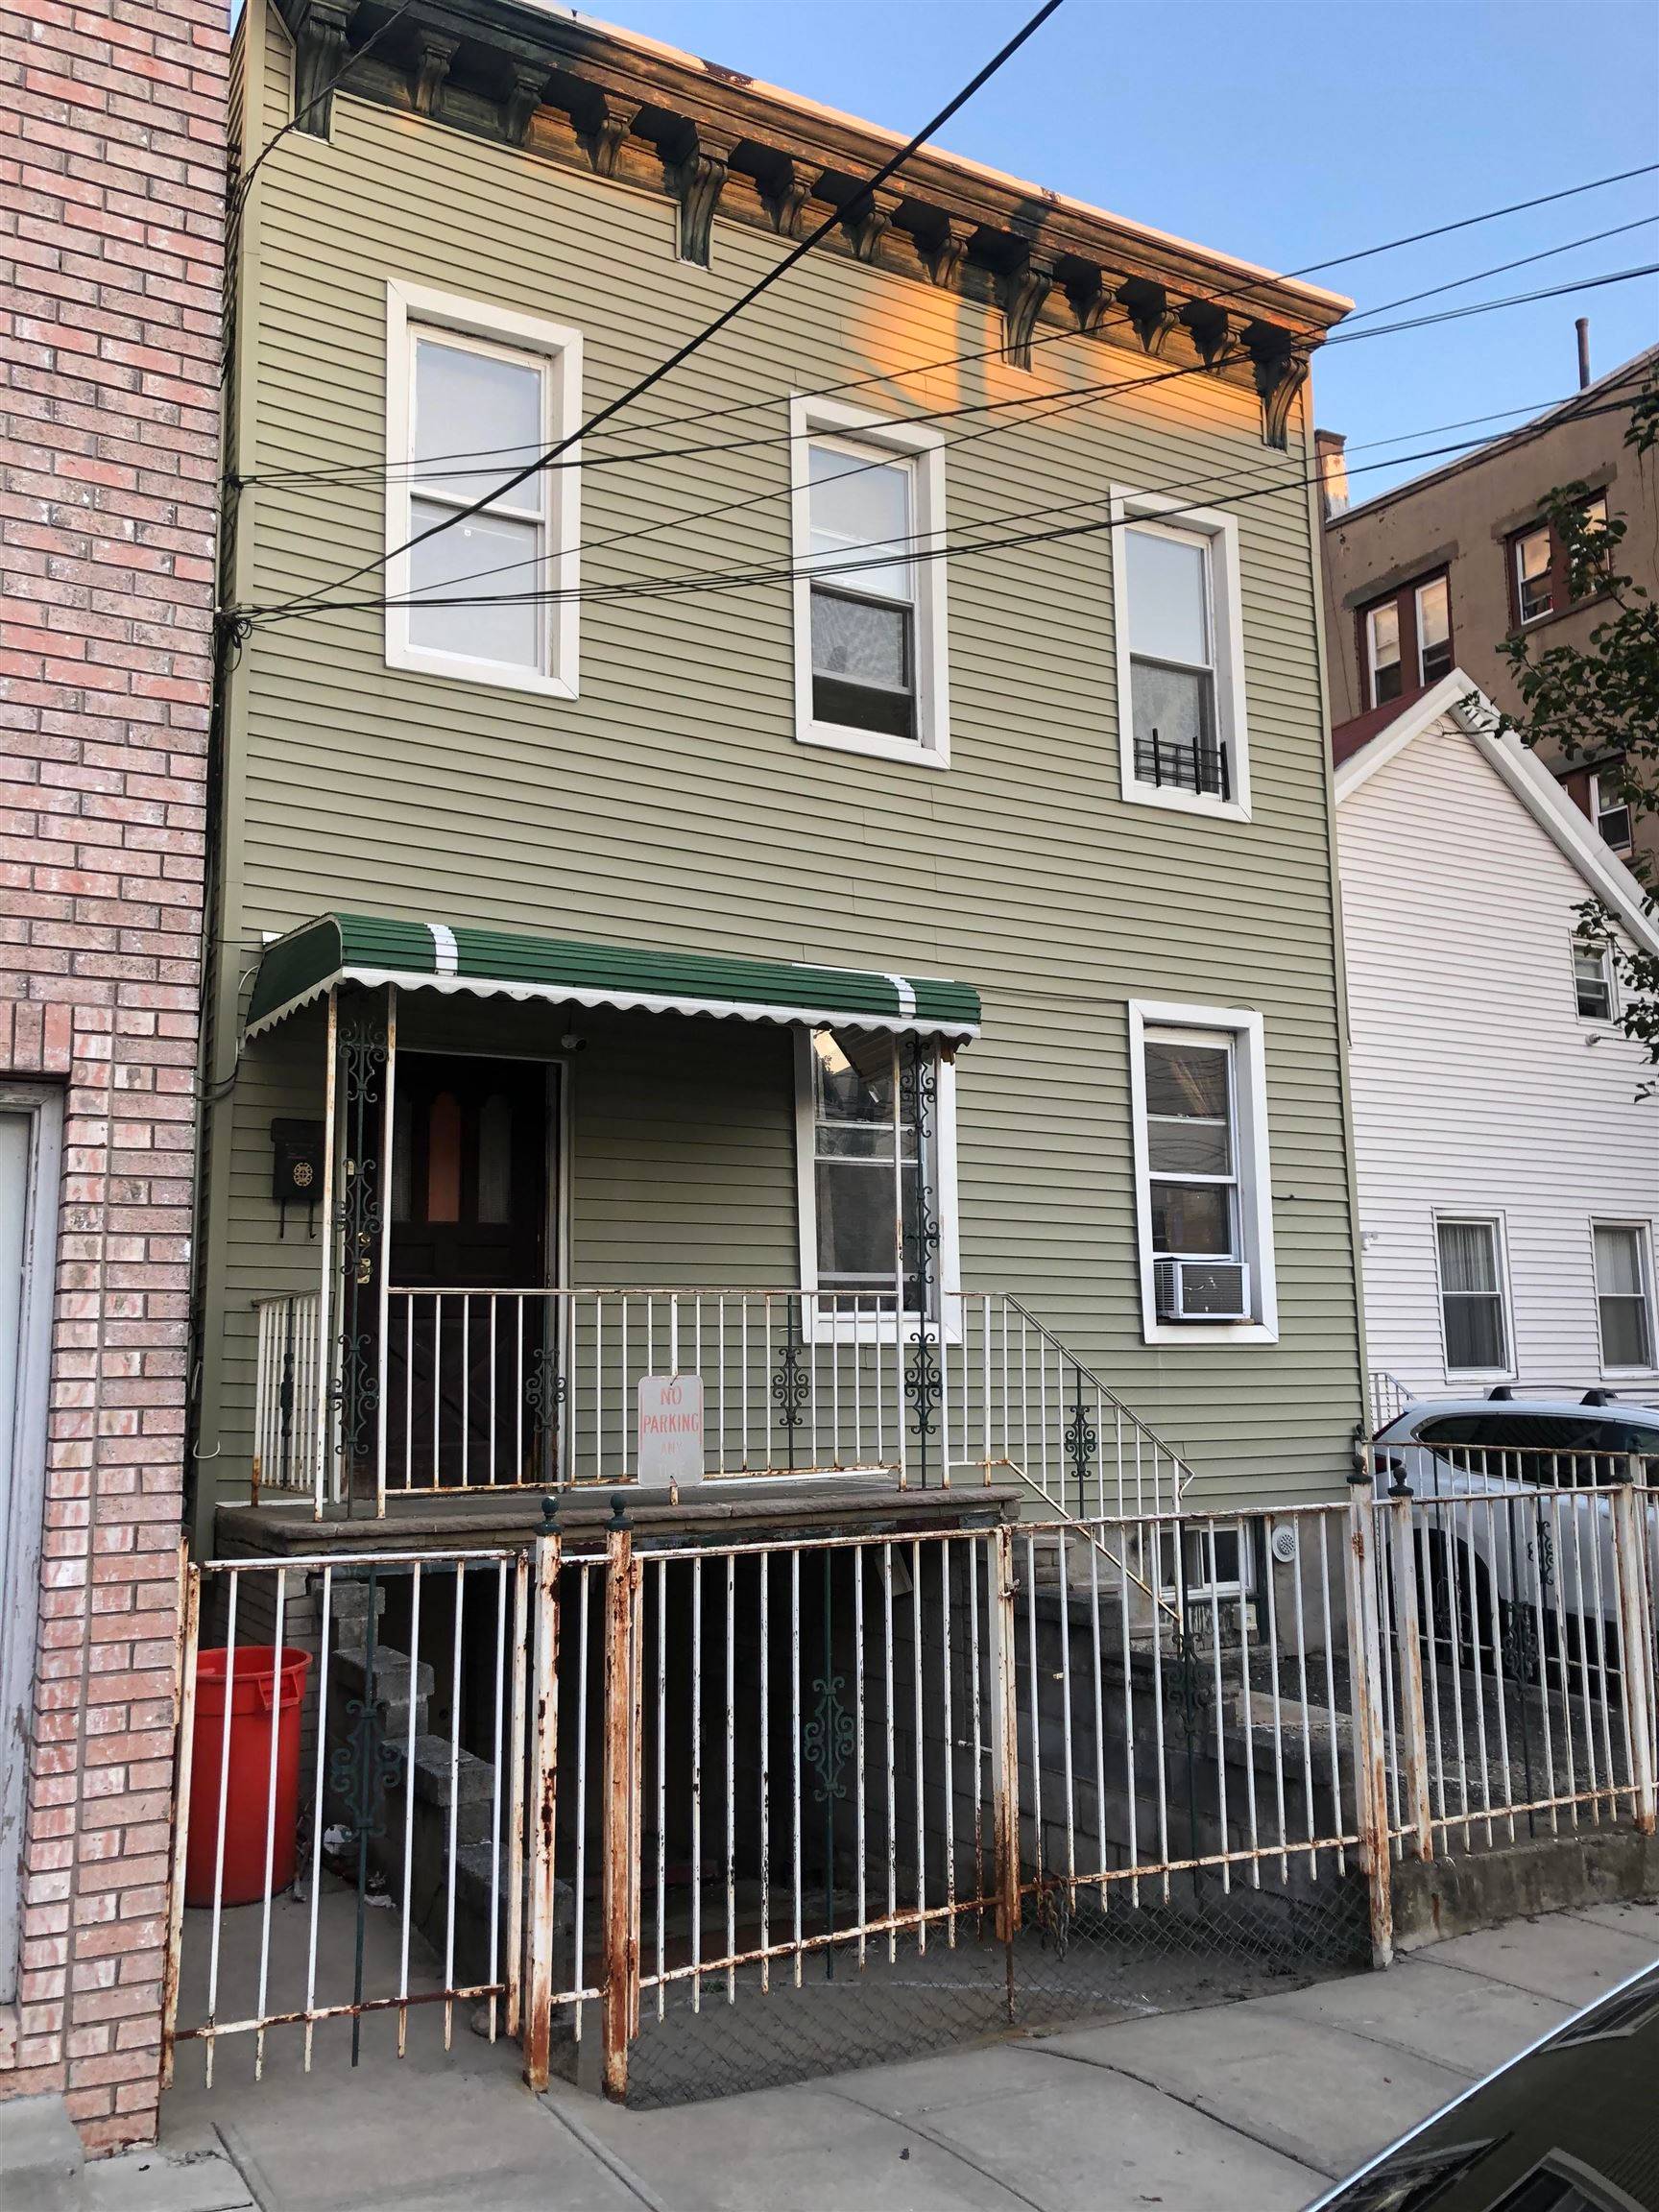 706 BERGENLINE AVE Multi-Family New Jersey